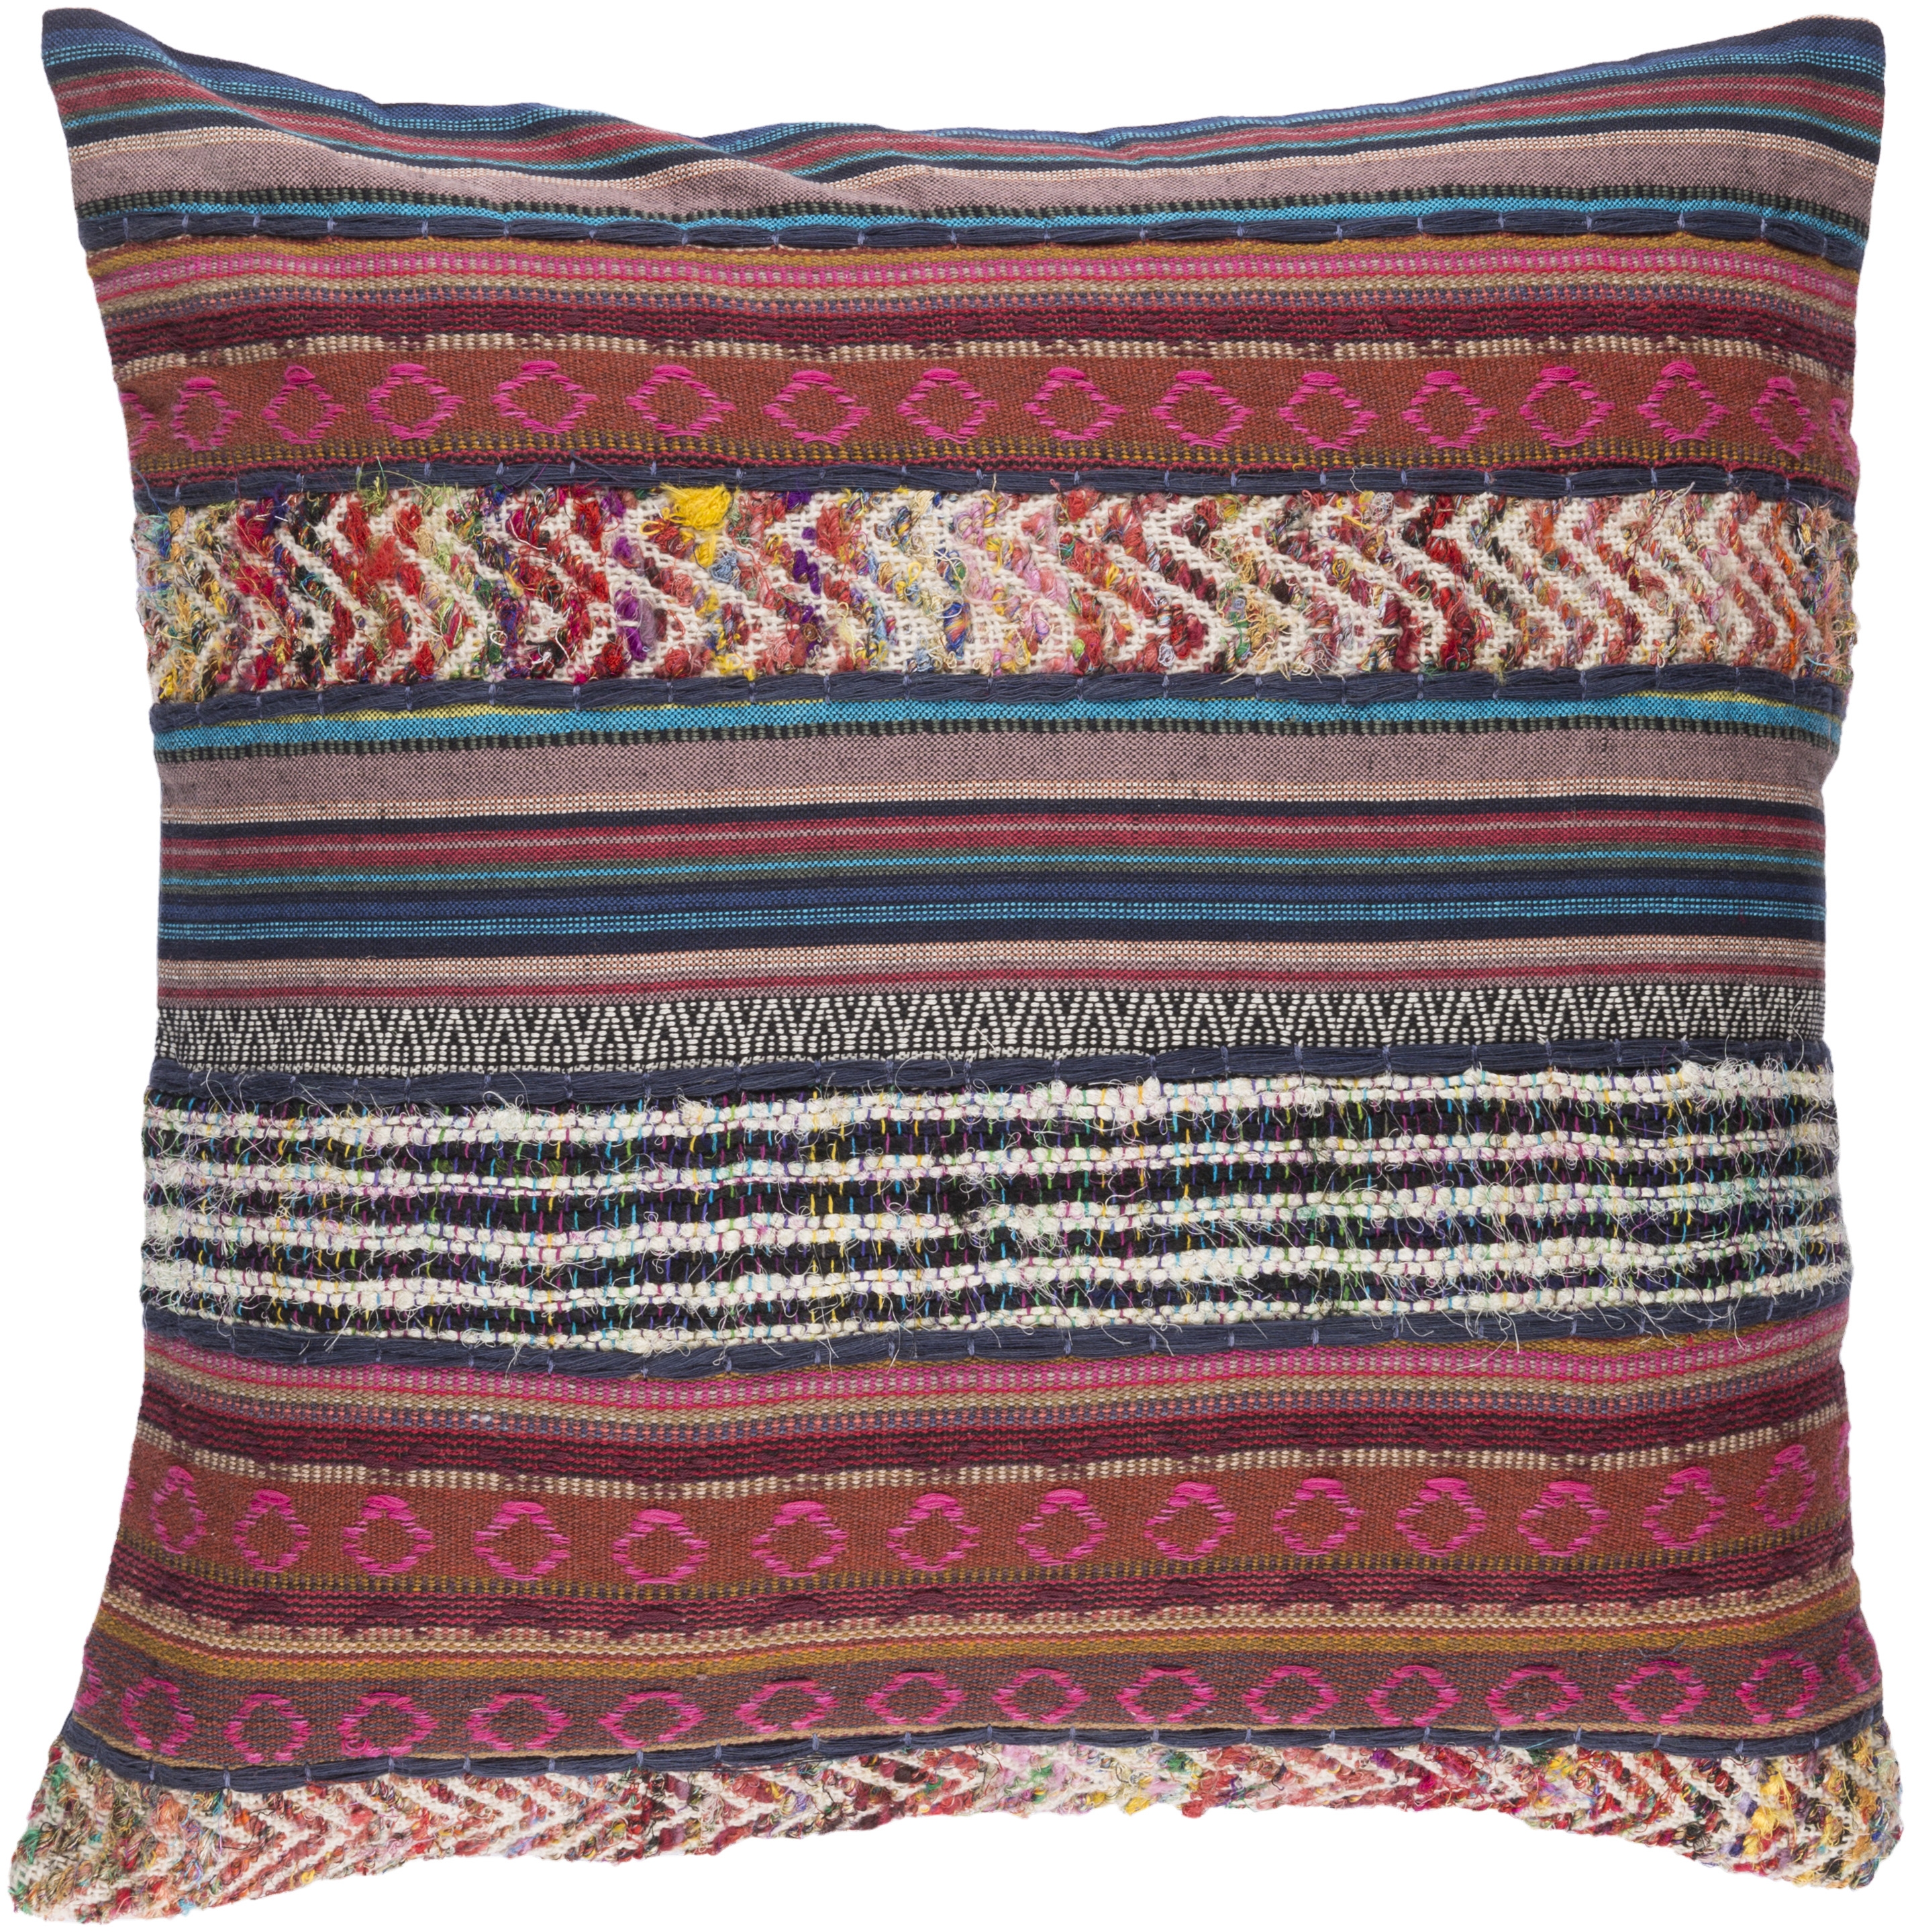 Marrakech Throw Pillow, 20" x 20", with poly insert - Image 0